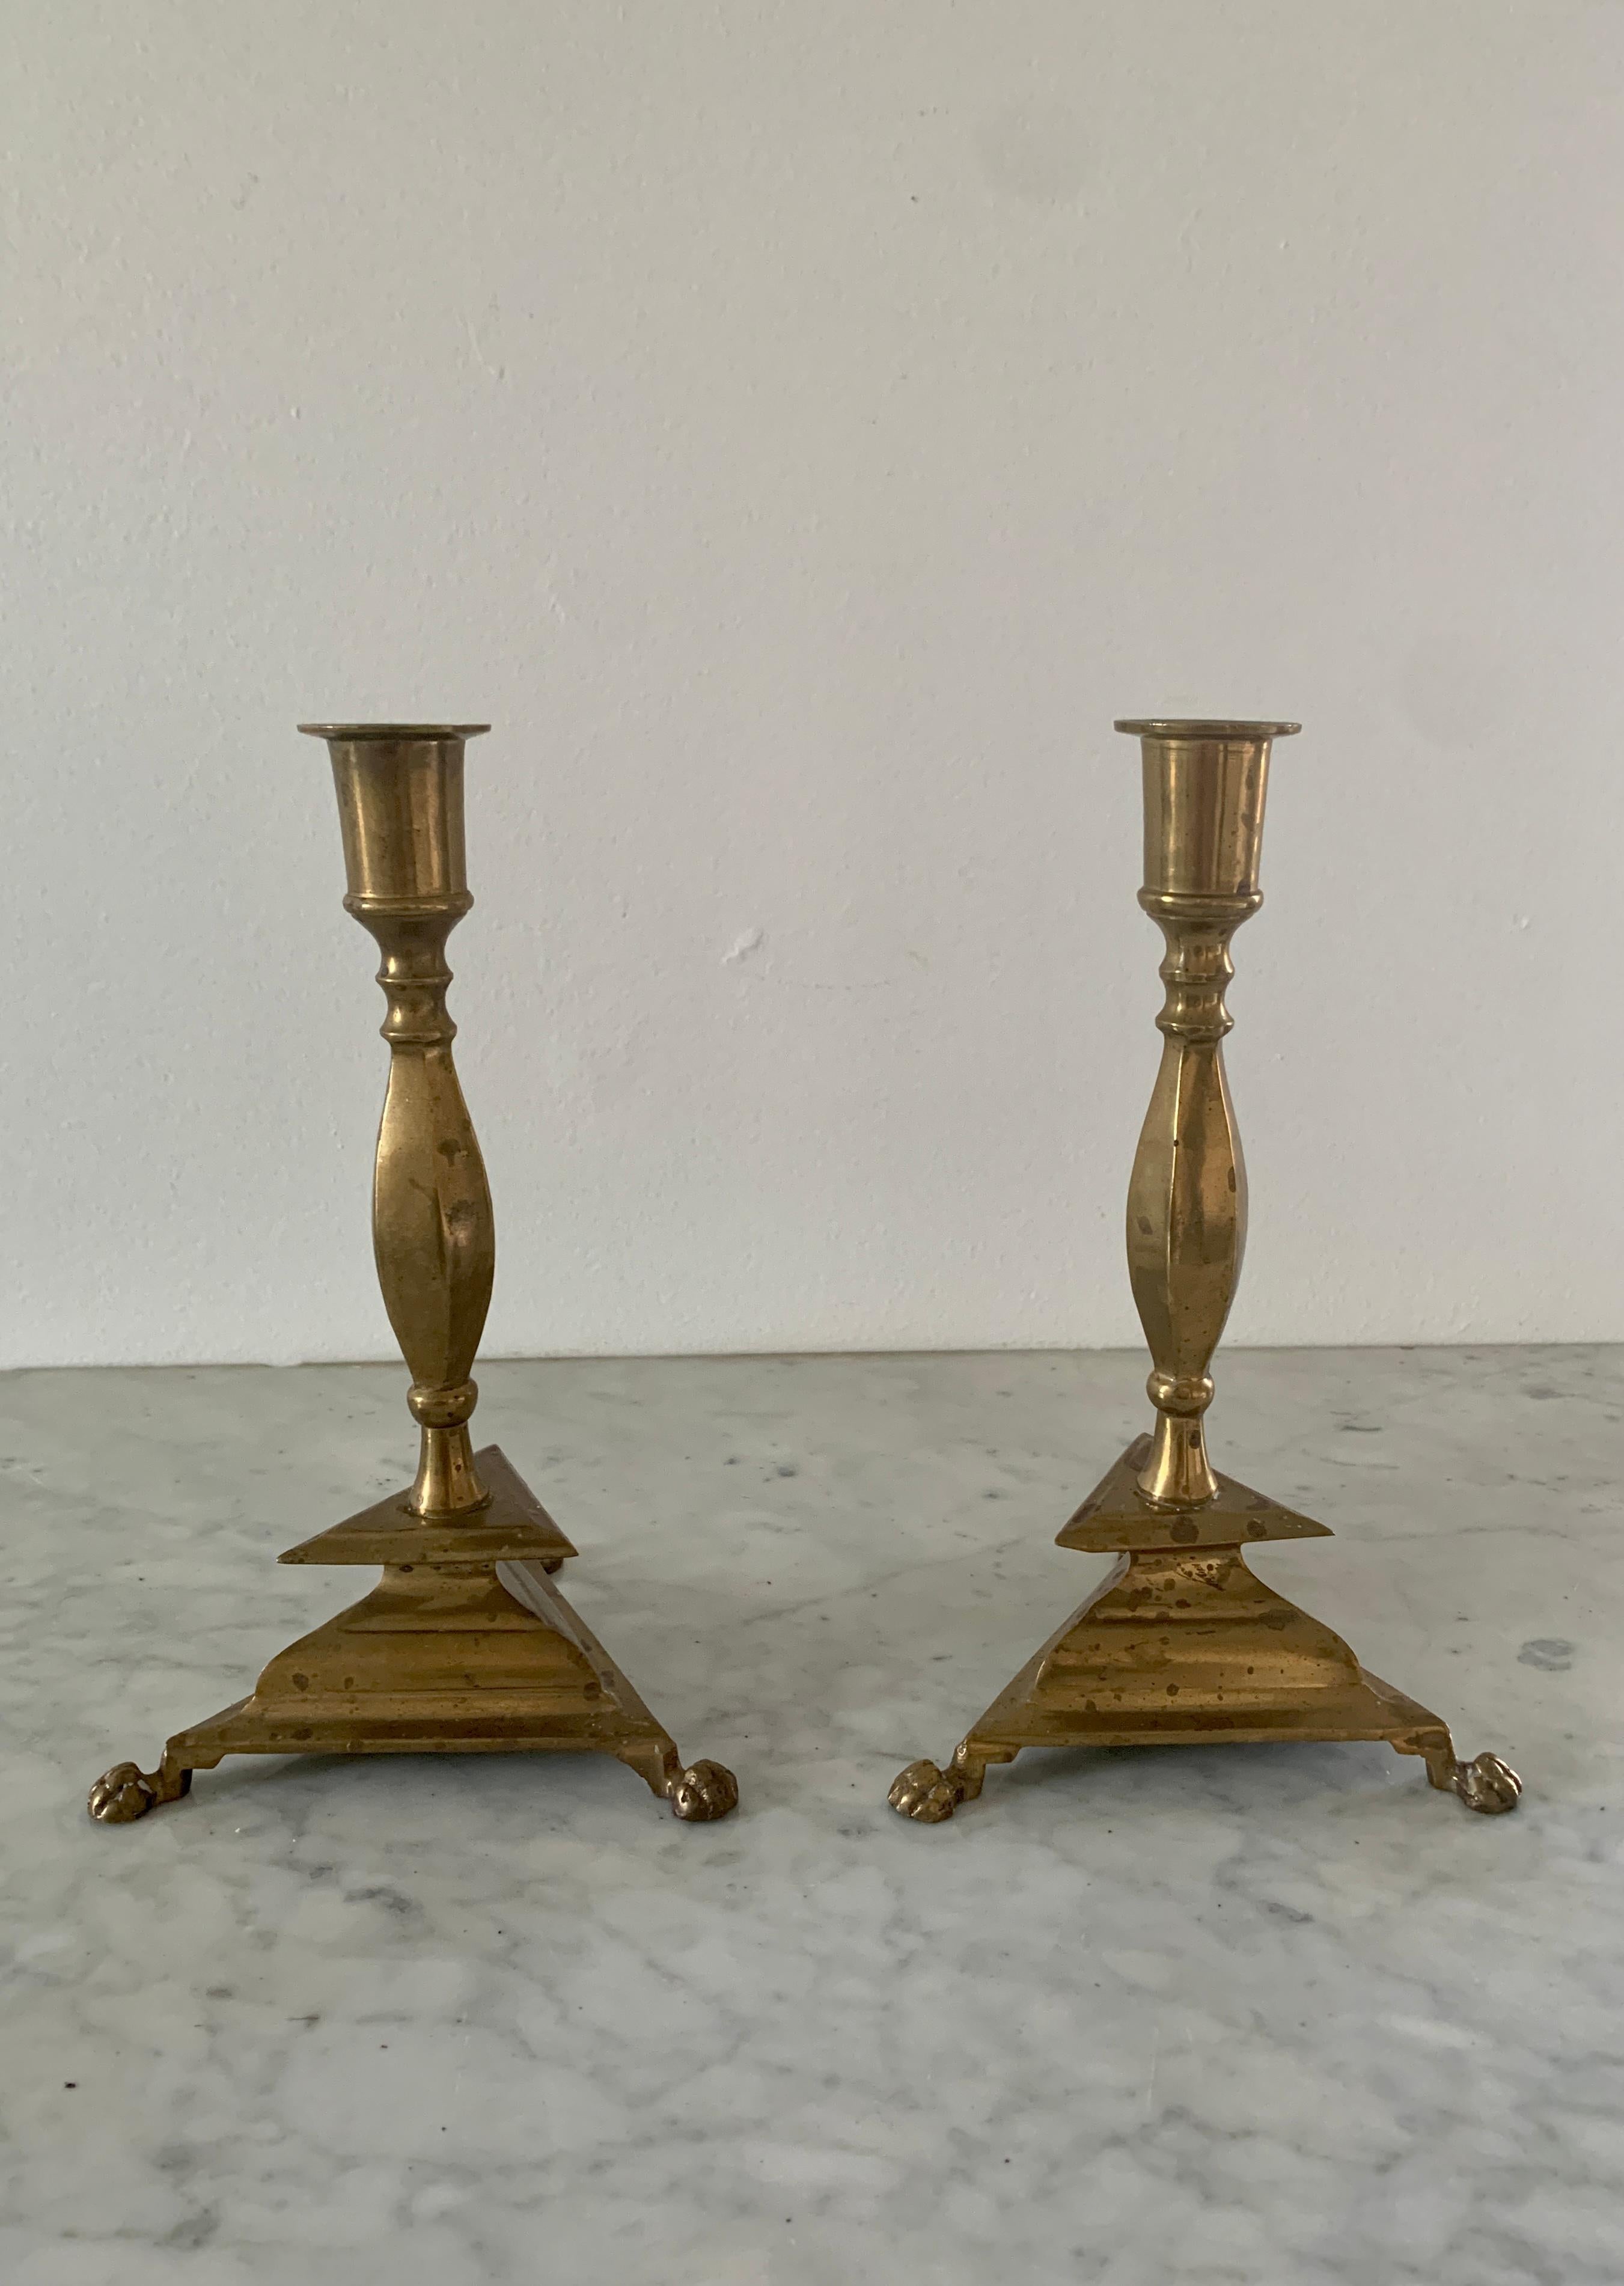 A gorgeous pair of Neoclassical style brass candle holders with paw feet

circa Mid-20th century

Measures: 5.25